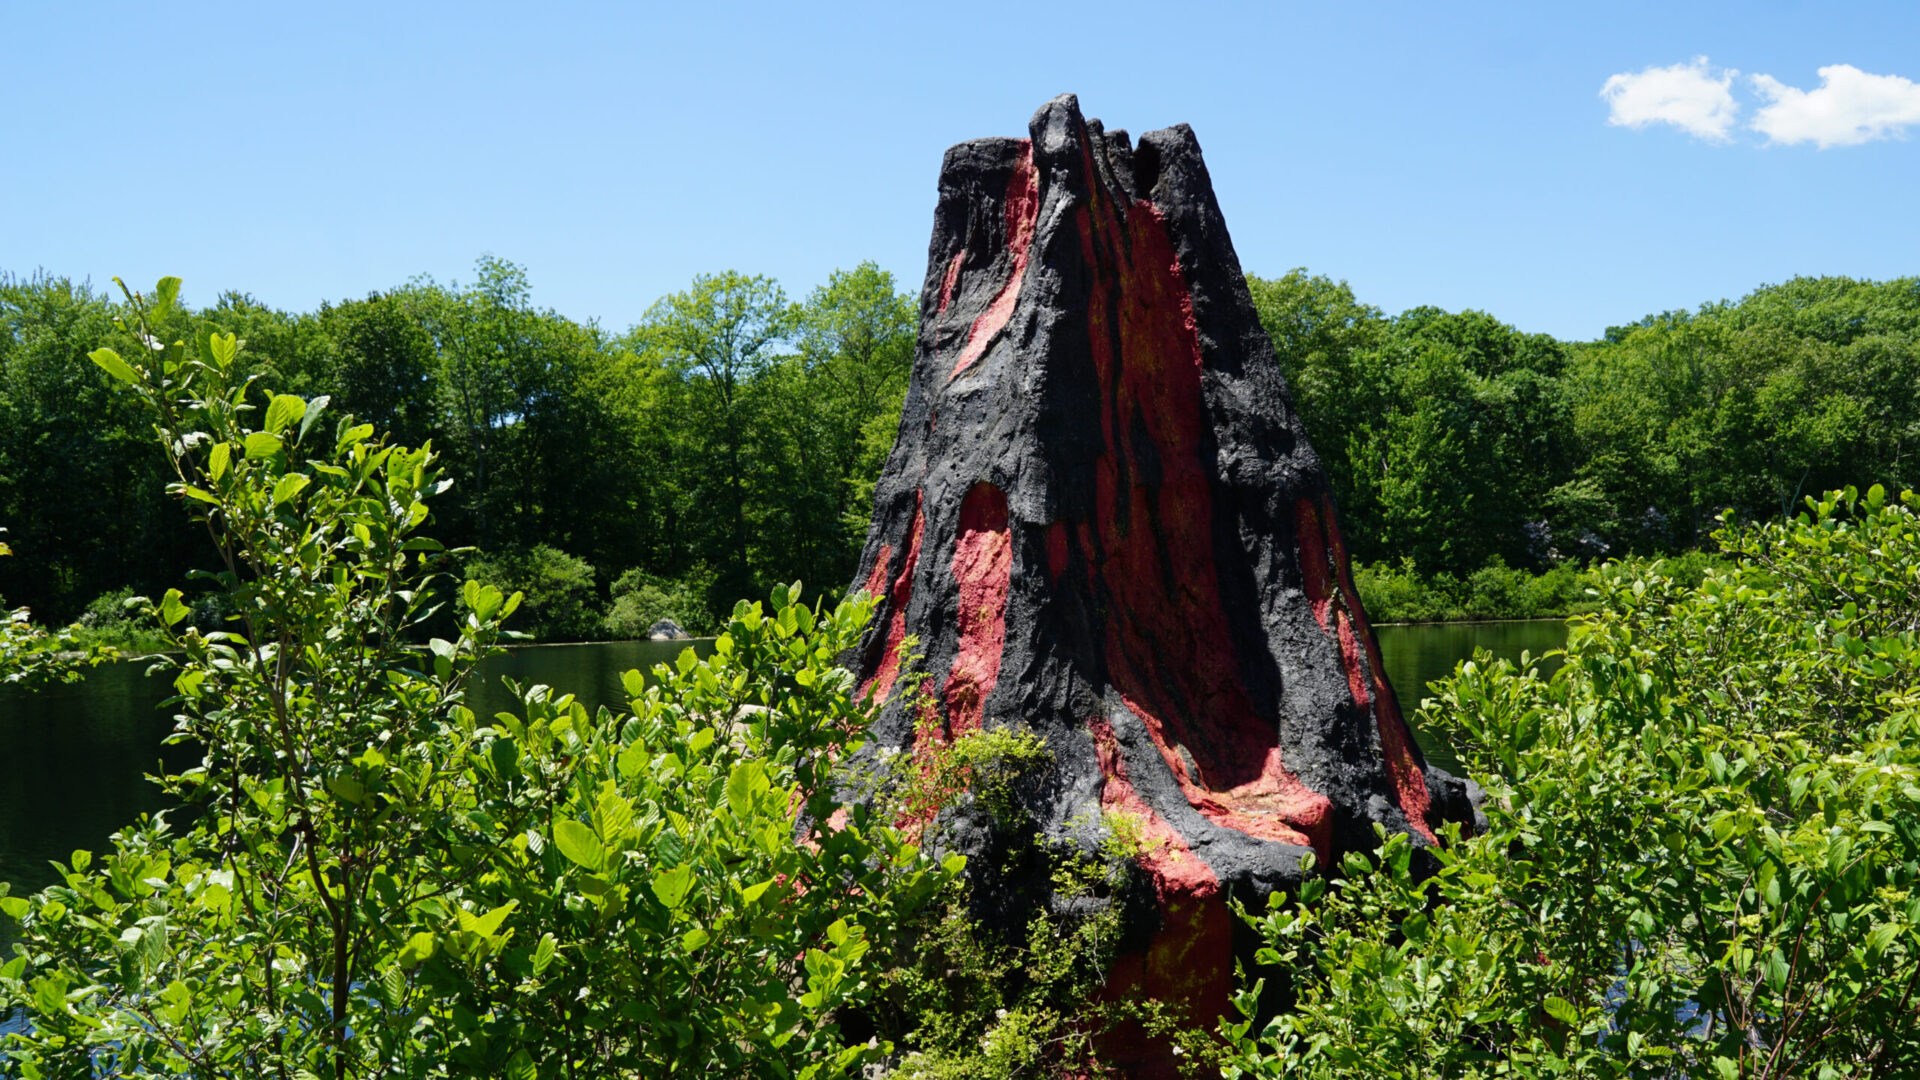 image of volcano at dinosaur place in montville ct.